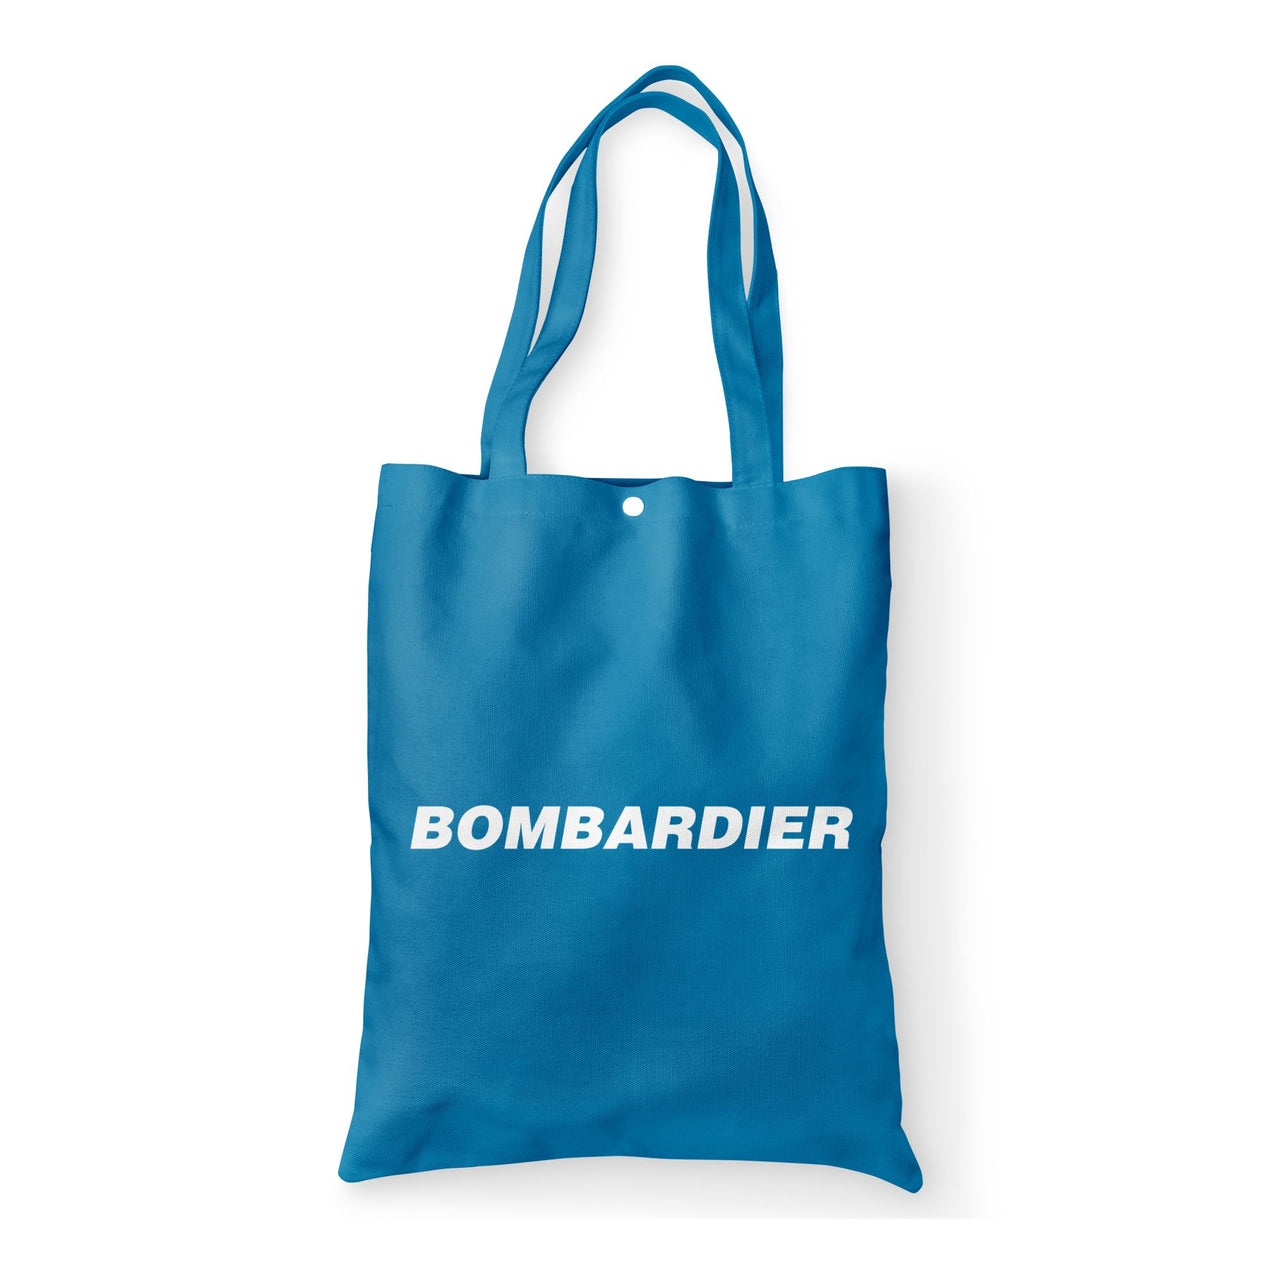 Bombardier & Text Designed Tote Bags